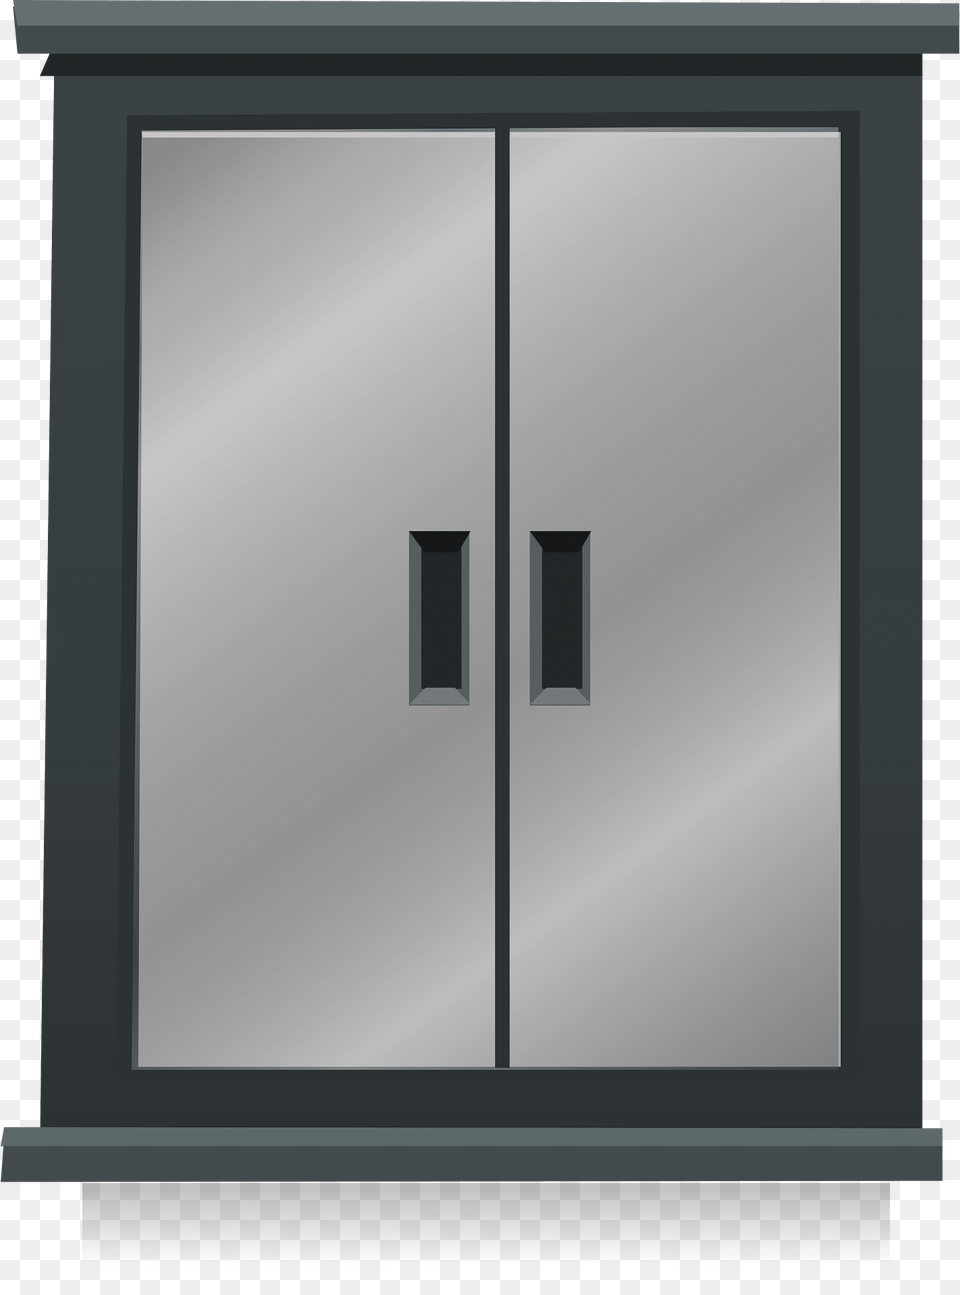 Stainless Steel Wardrobe Clipart, Furniture, Cabinet, Door, Closet Free Transparent Png